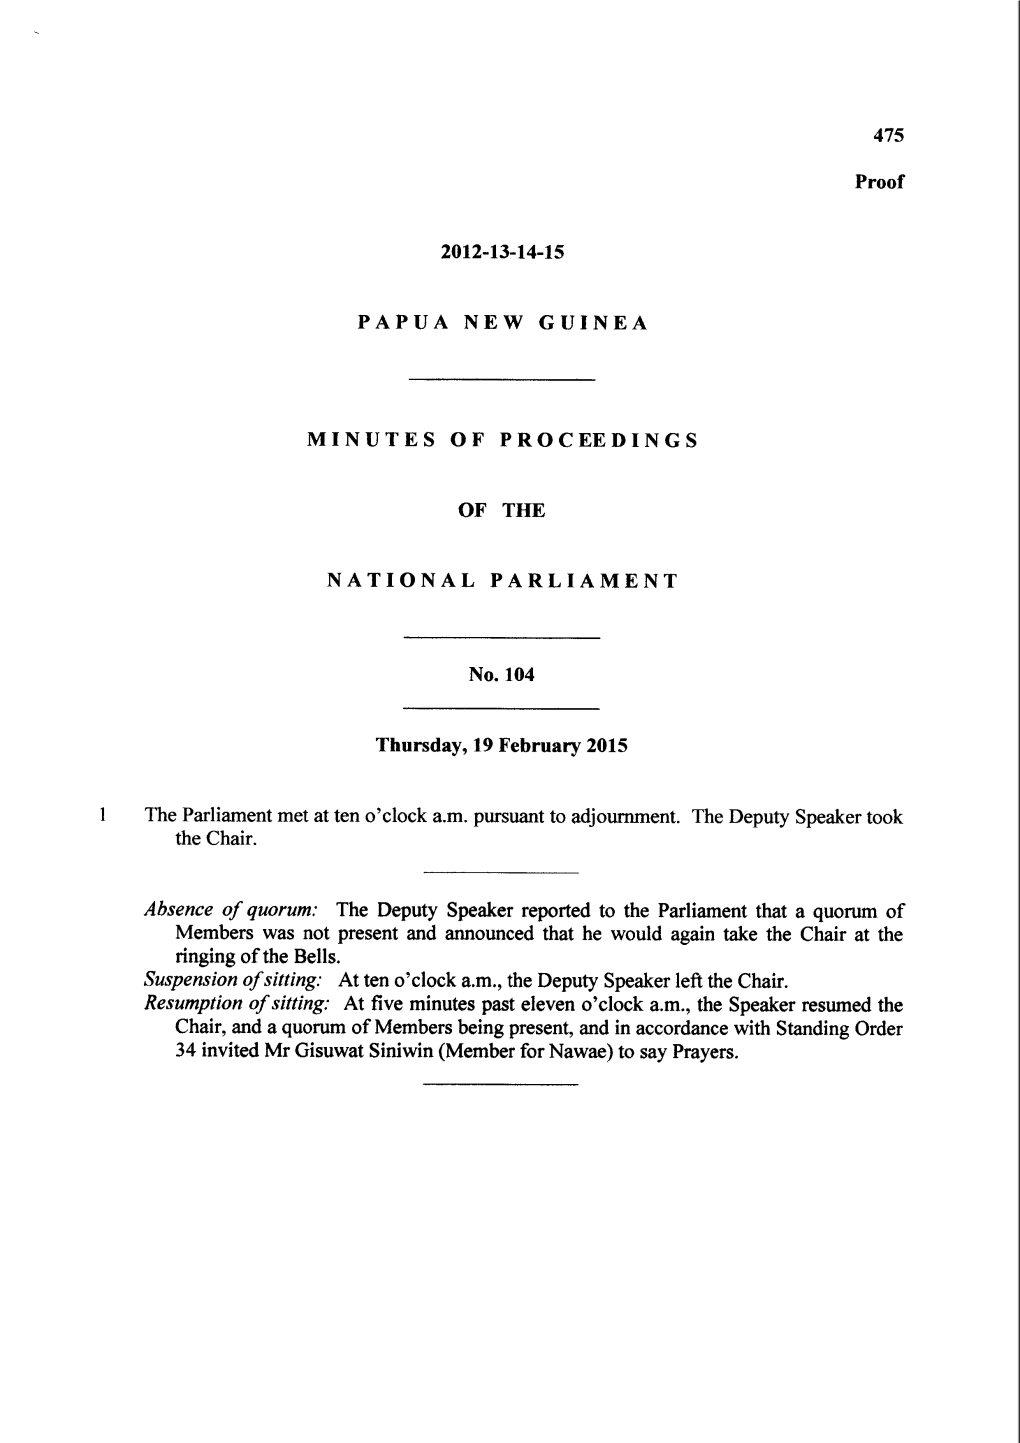 2012-13-14-15 Papua New Guinea Minutes of Proceedings Of